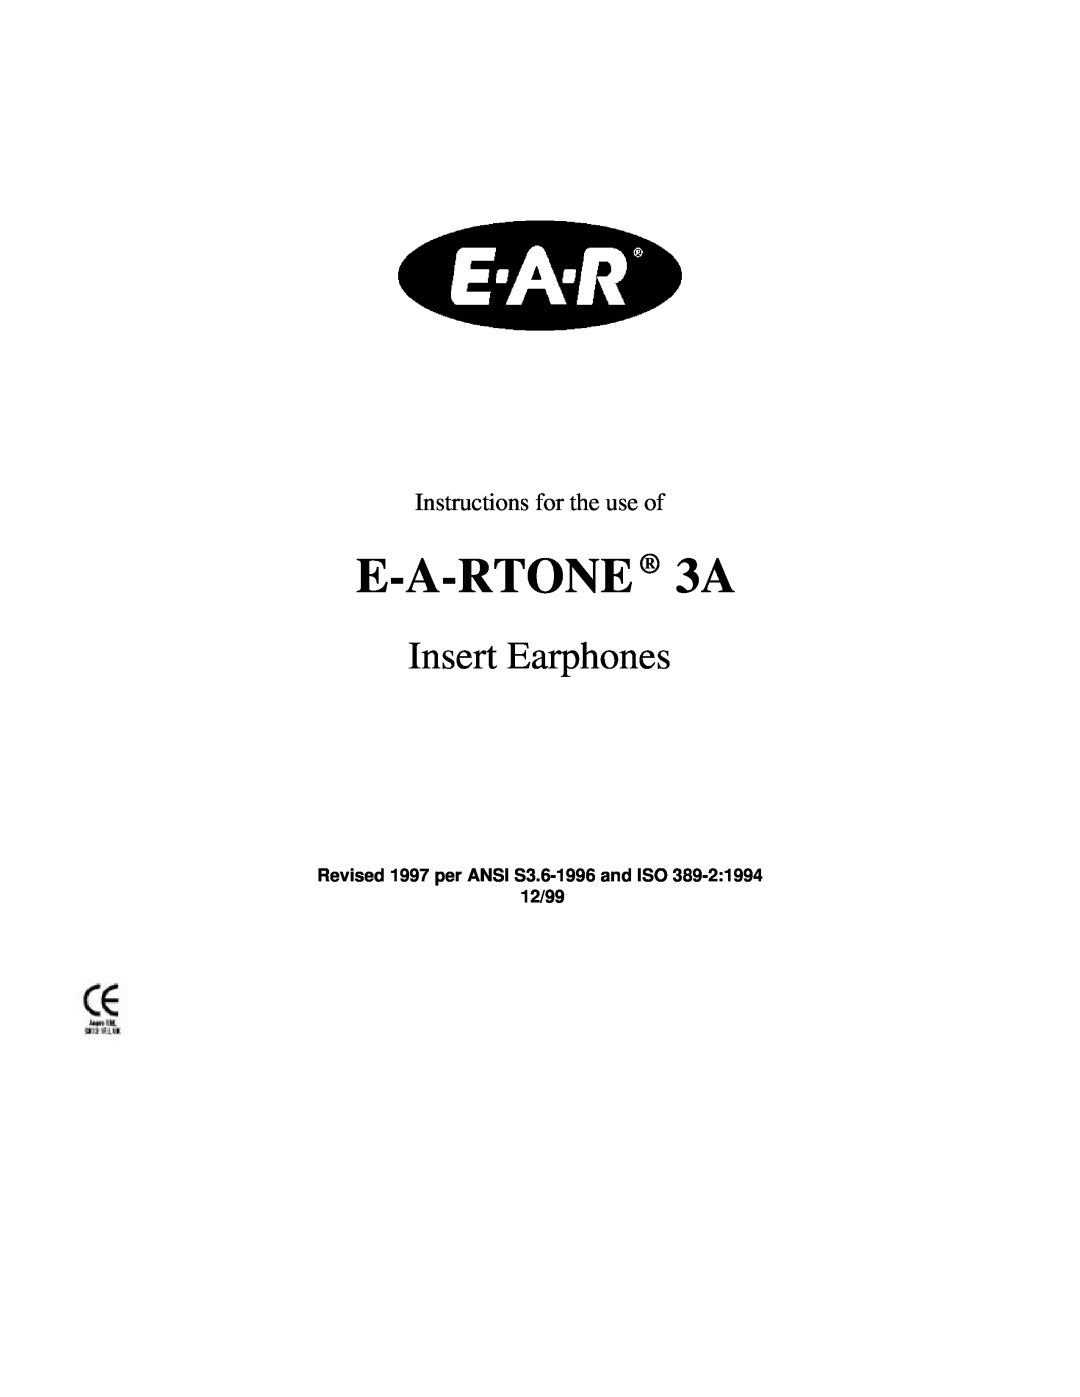 AOSafety E-A-RTONE 3A manual Insert Earphones, Instructions for the use of, Revised 1997 per ANSI S3.6-1996and ISO, 12/99 